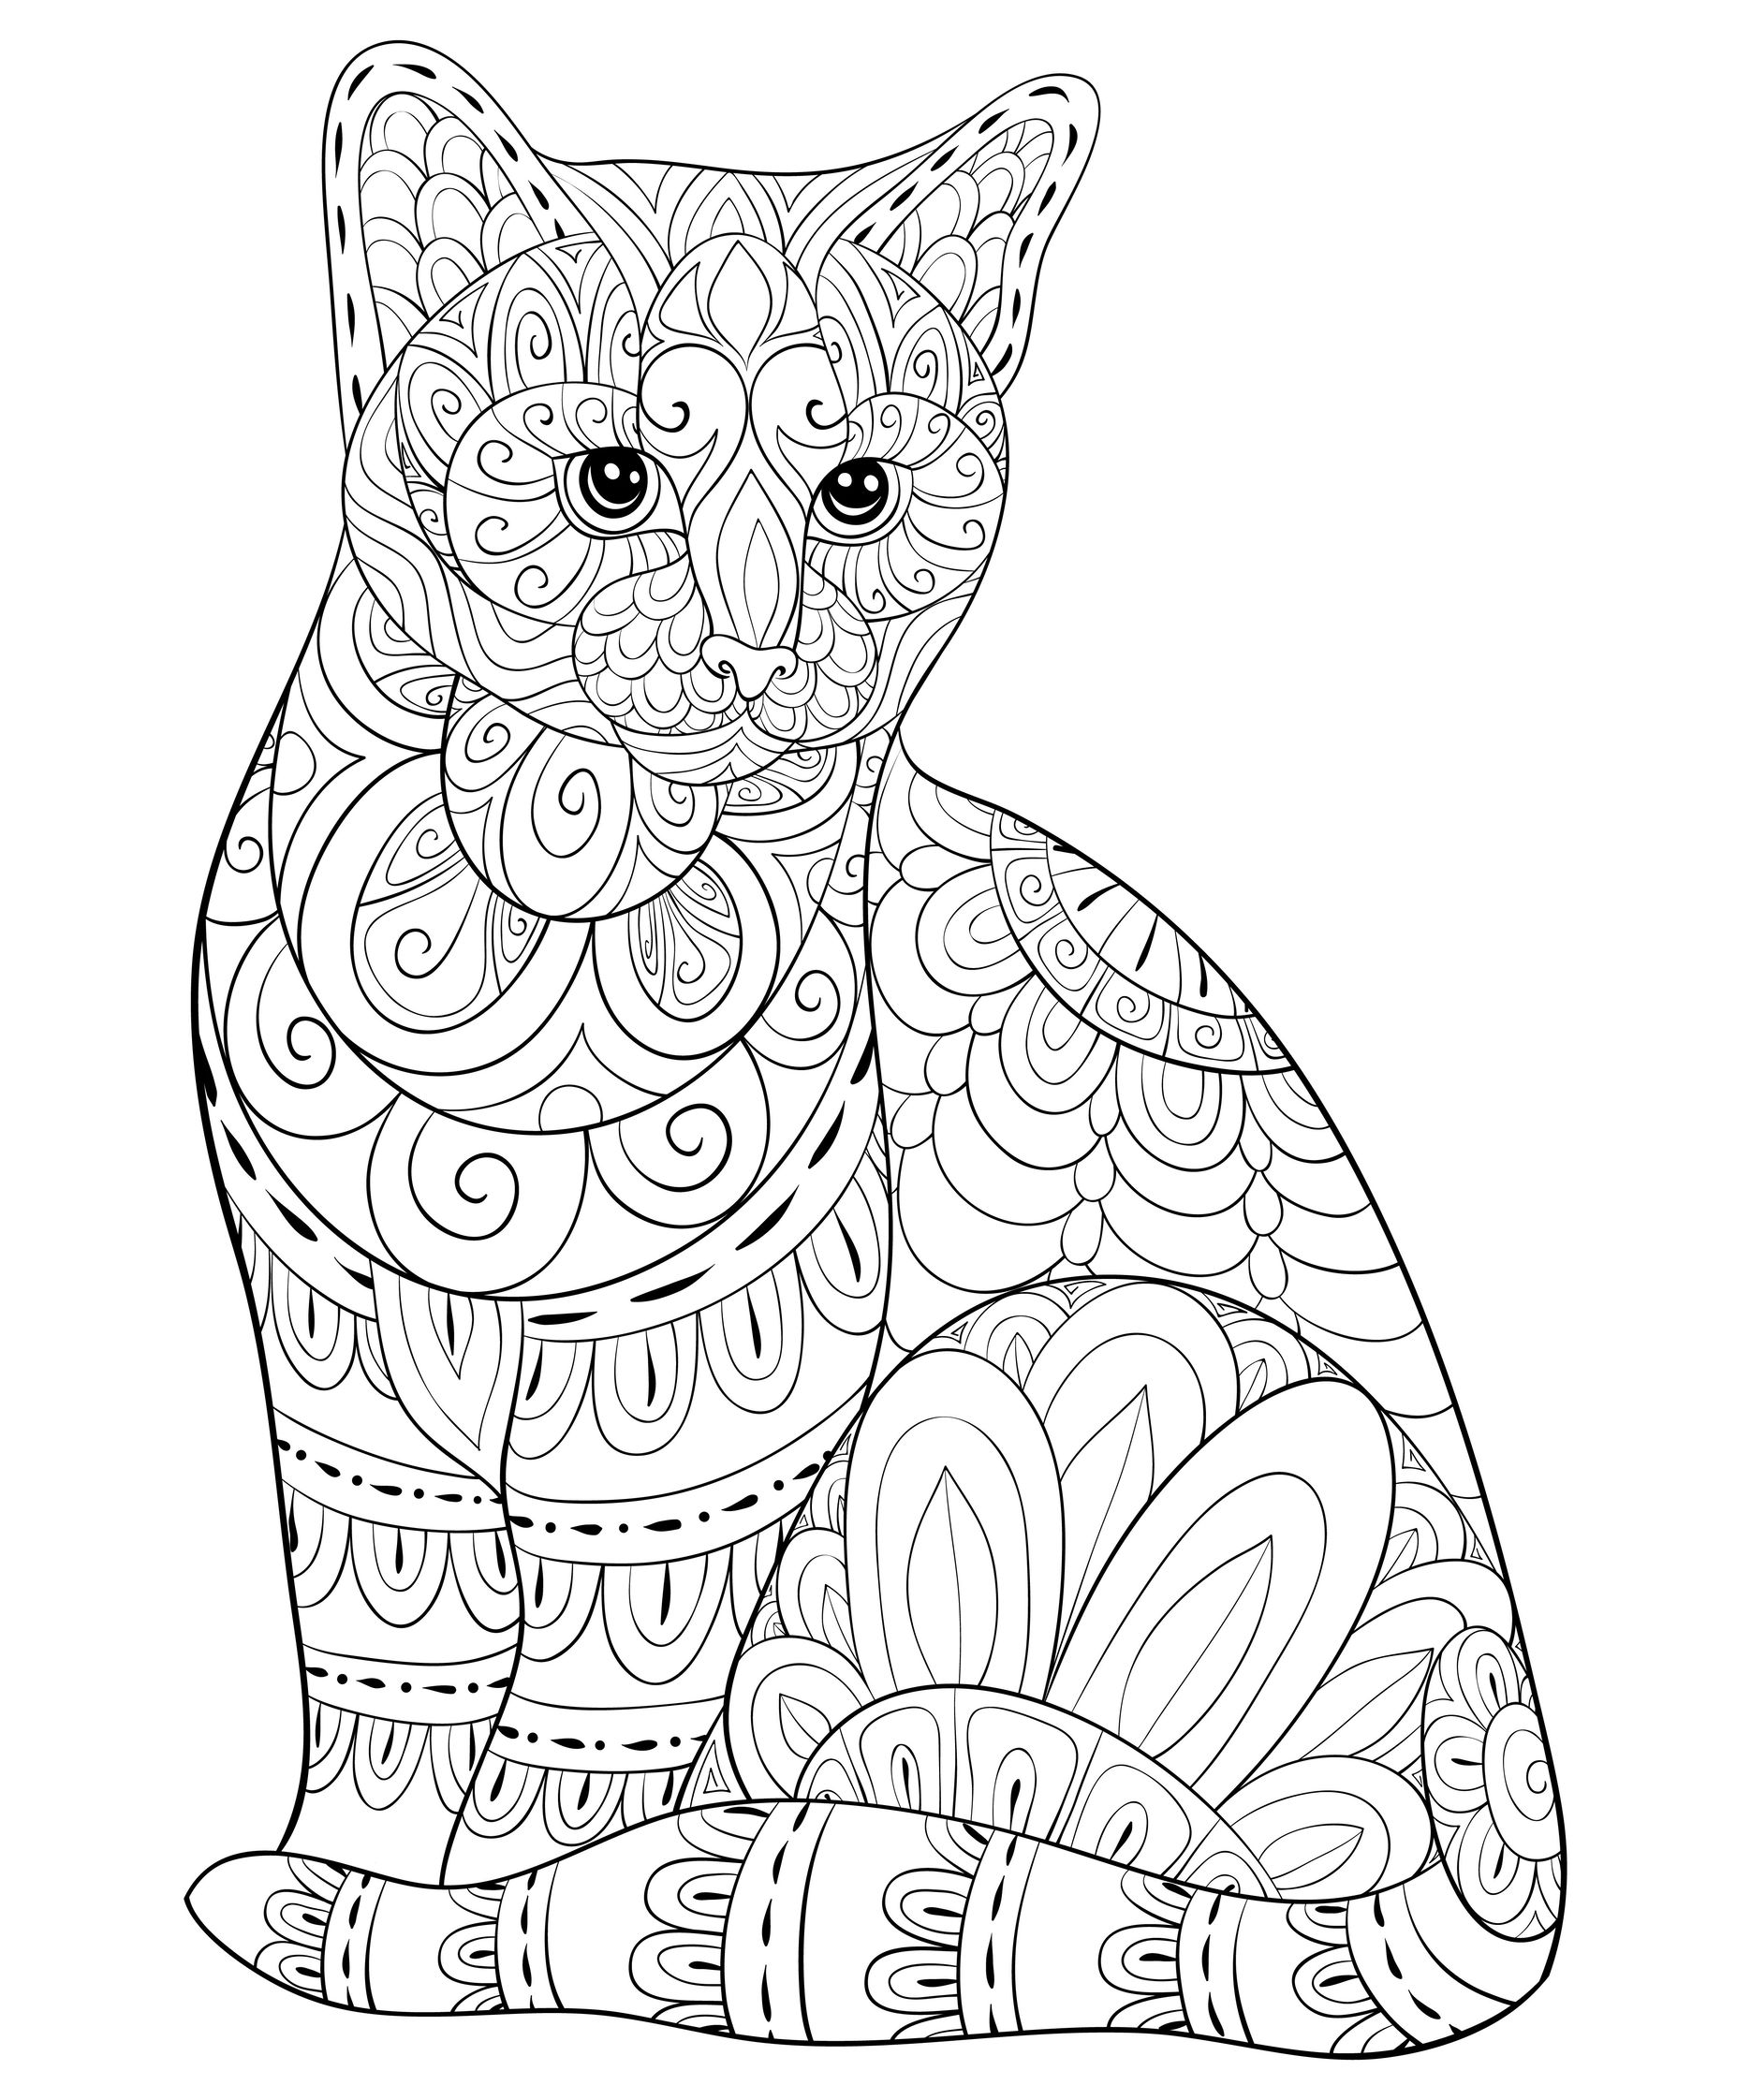 Cat to color with Zentangle patterns - Cats Kids Coloring Pages